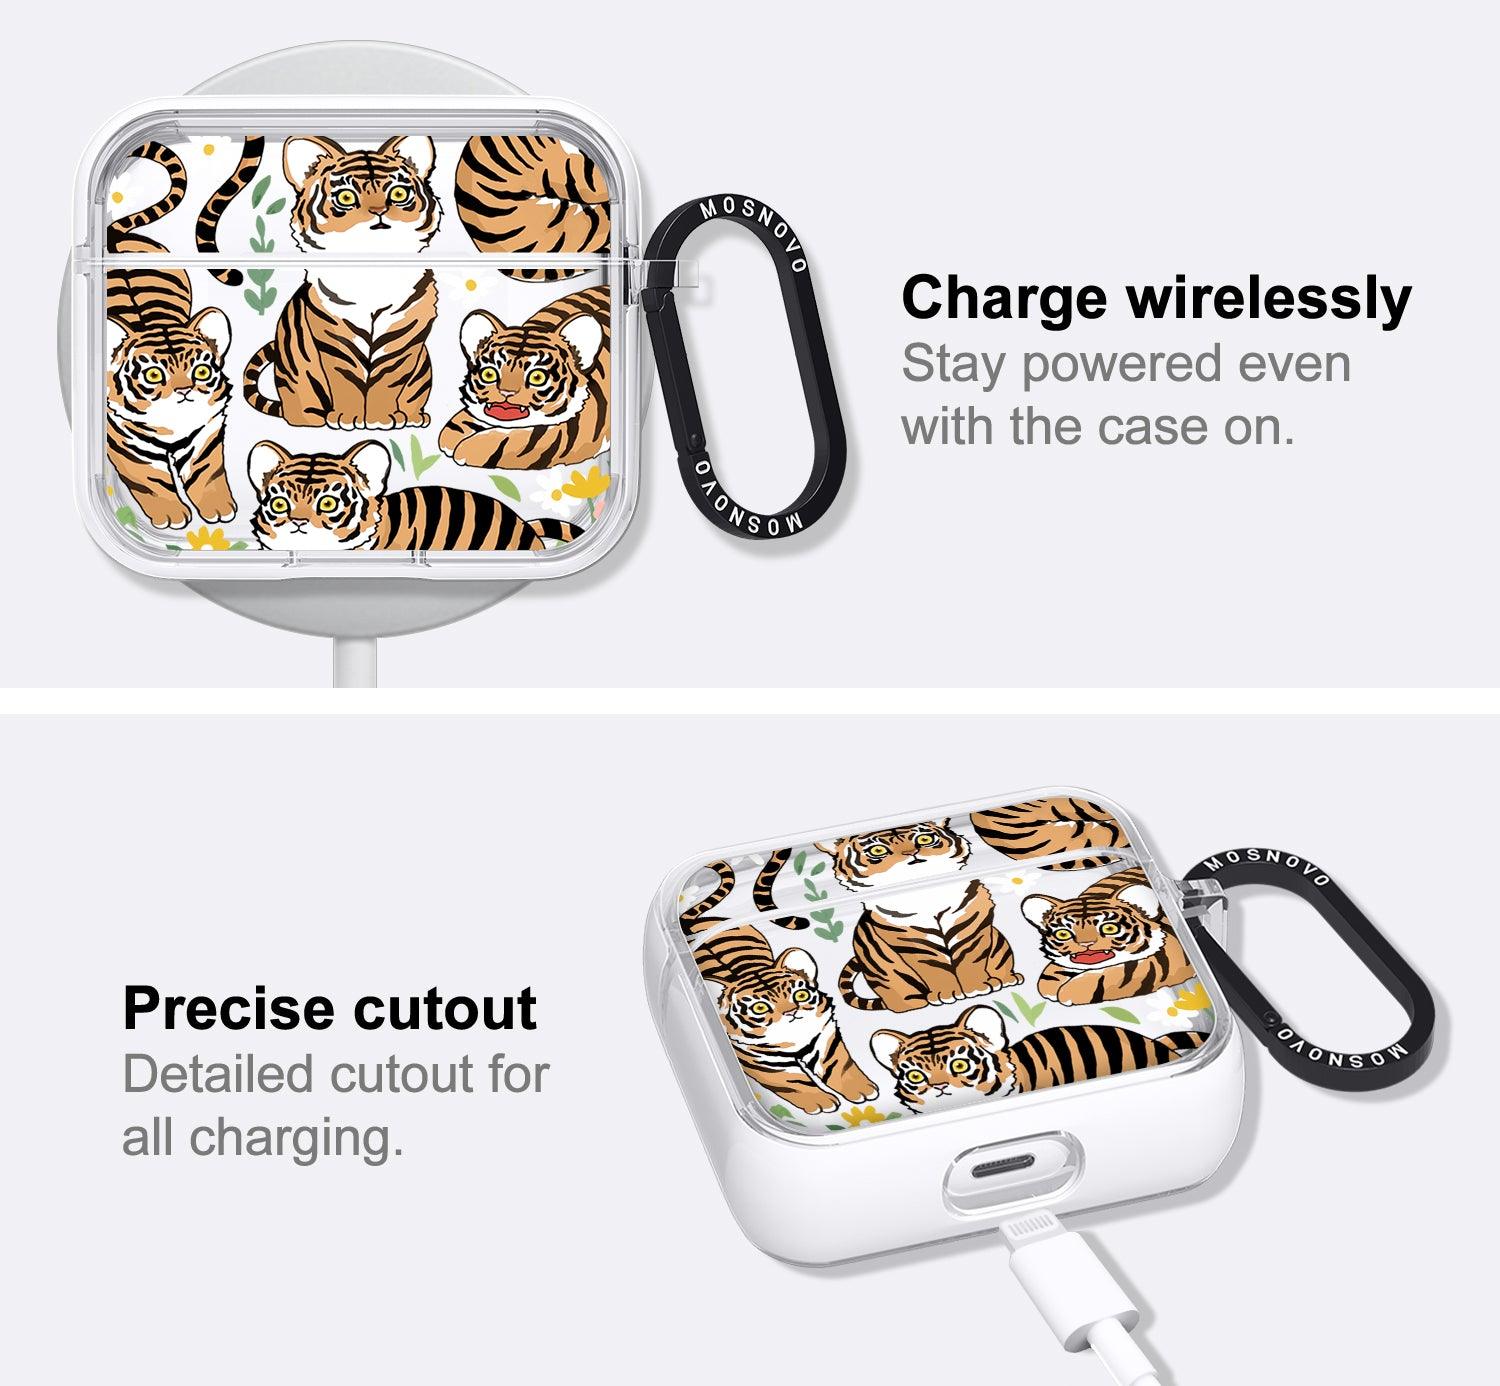 Cute Tiger AirPods 3 Case (3rd Generation) - MOSNOVO